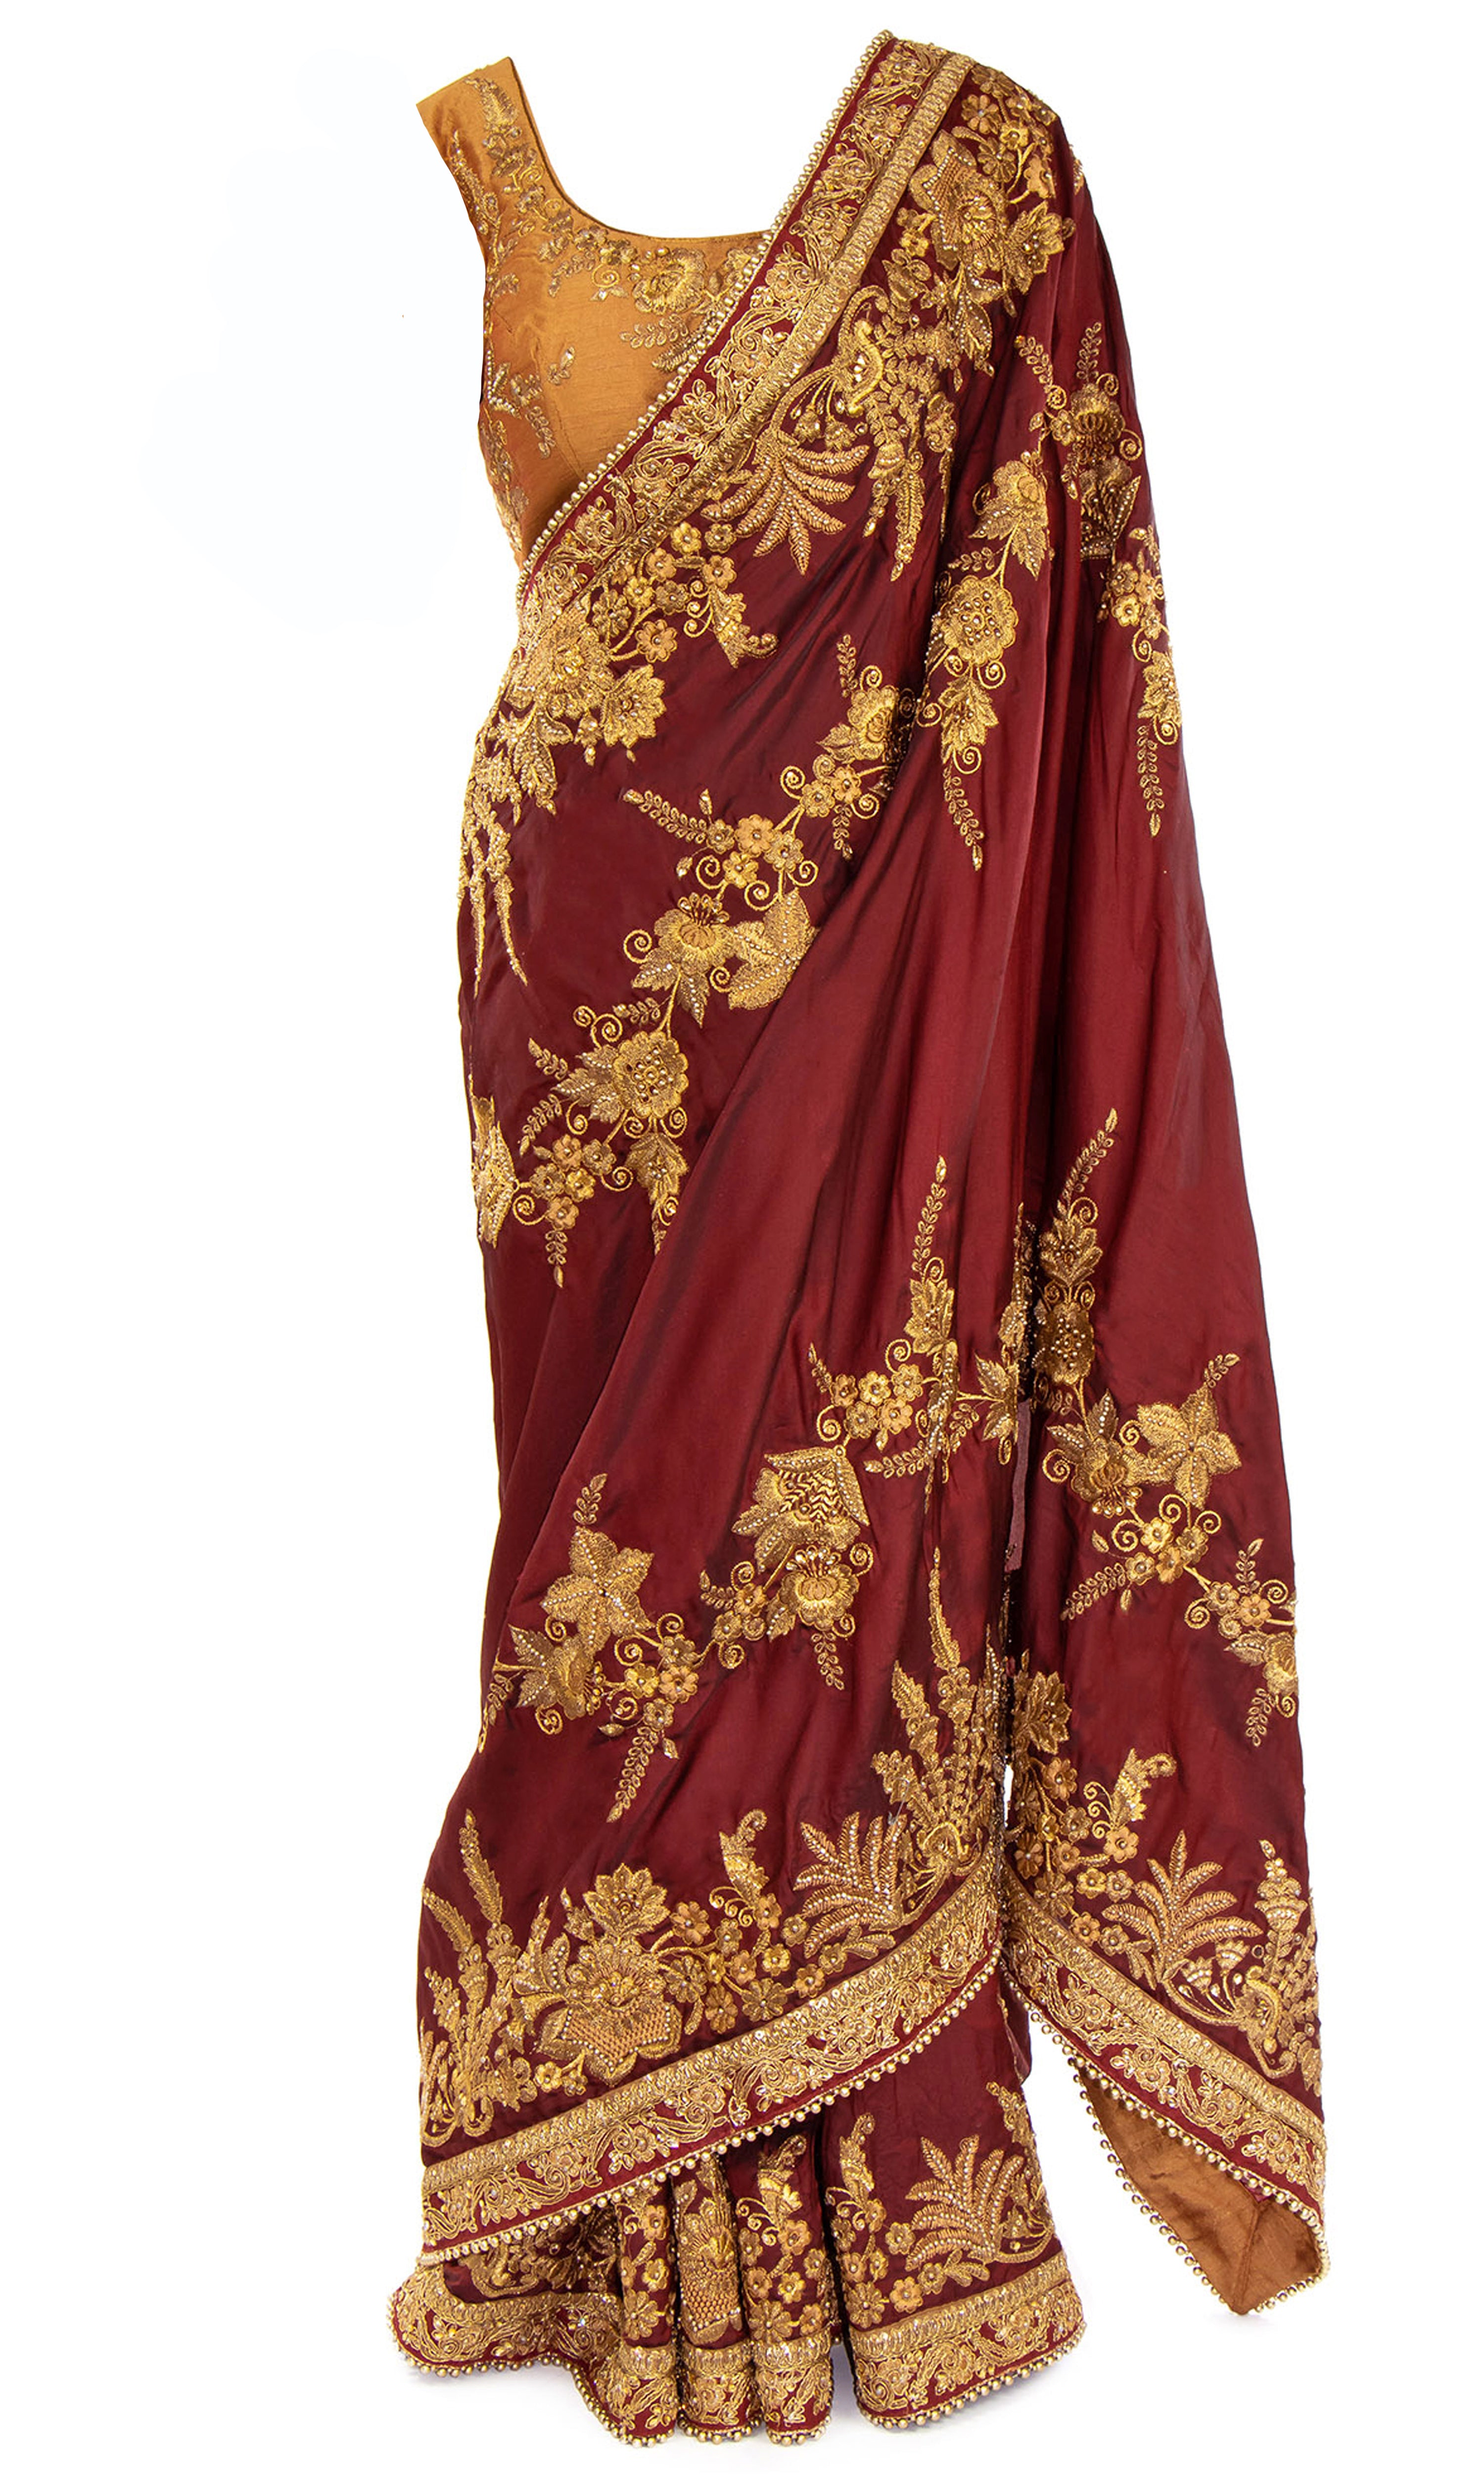 Pre-stitched maroon silk Saree with burnt orange blouse embellished with gold thread and beadwork